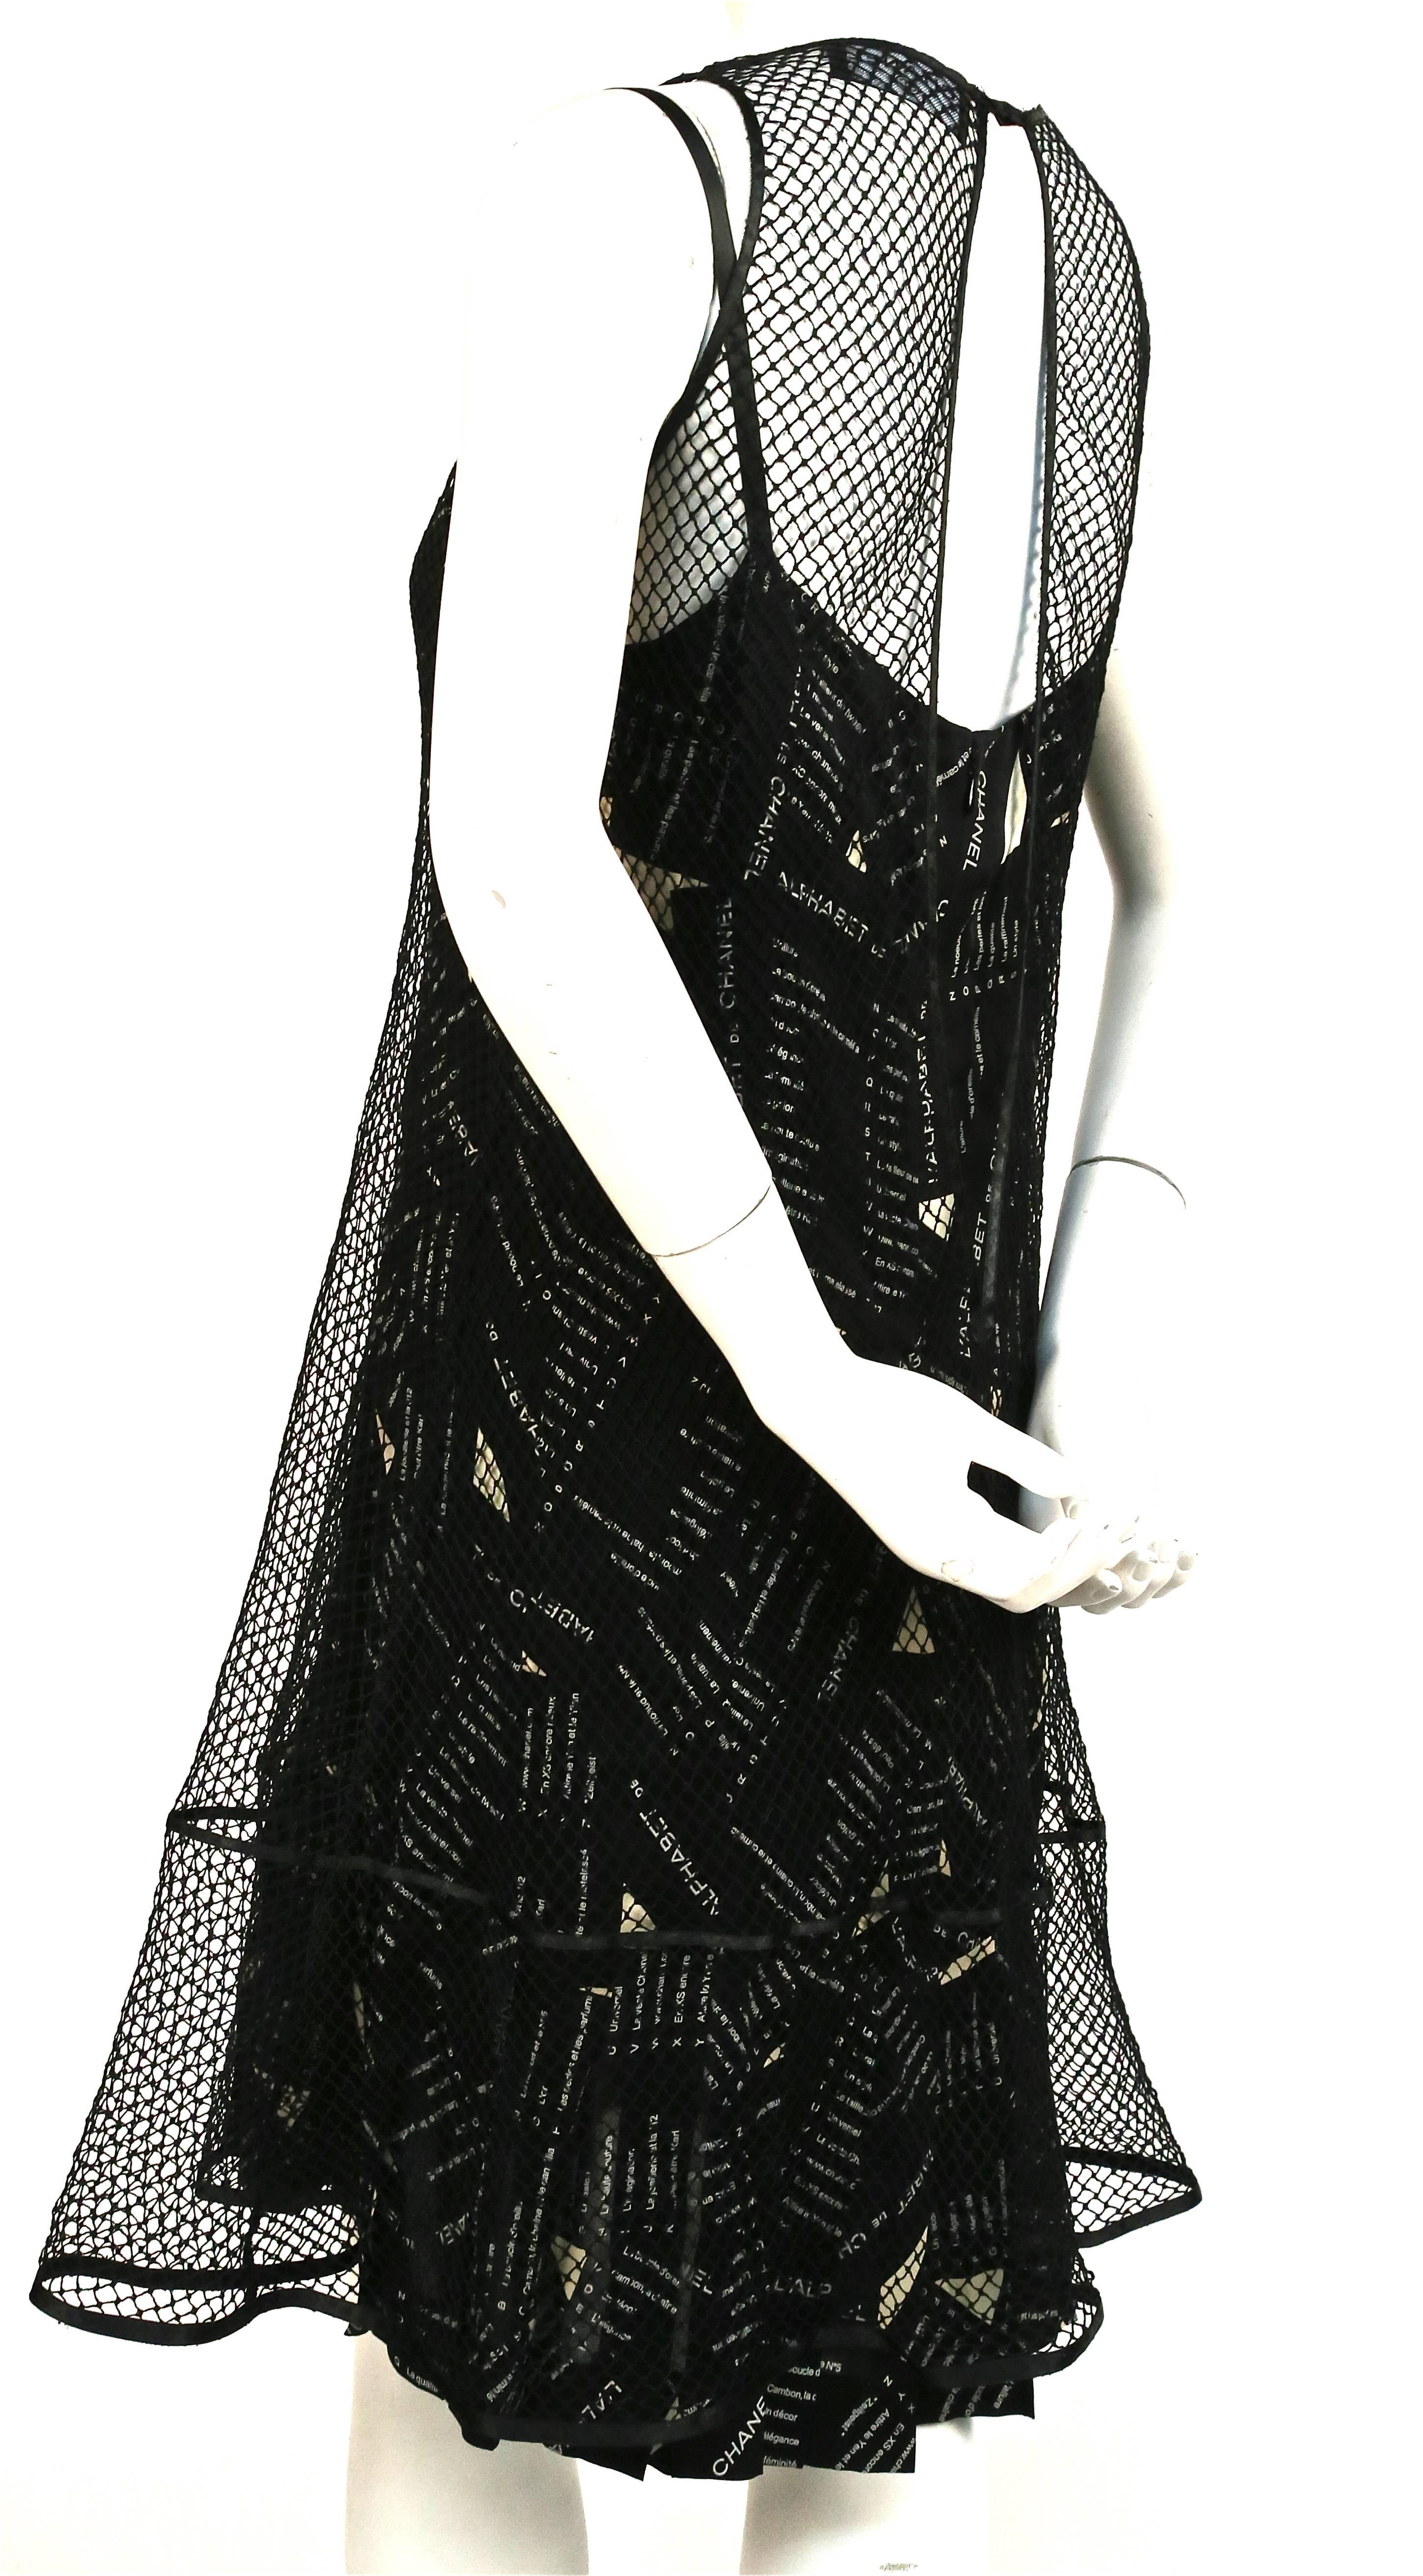 Very rare black and cream printed silk dress with sheer net overlay from Chanel exactly as seen on the runway for fall of 2005. French size 38. Approximate measurements are: bust 34